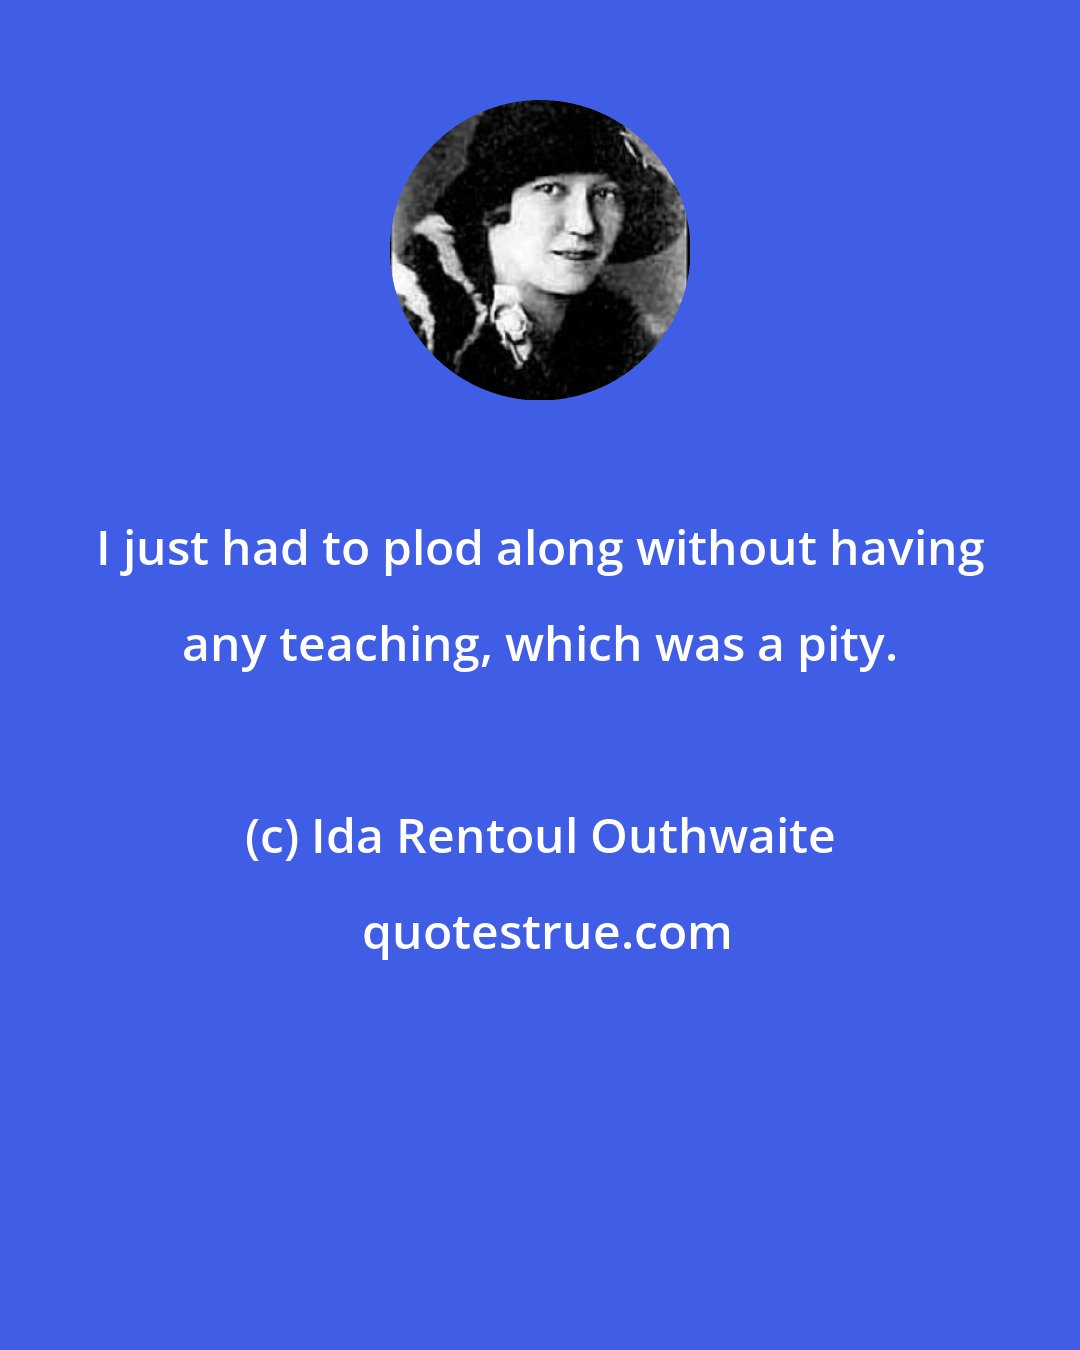 Ida Rentoul Outhwaite: I just had to plod along without having any teaching, which was a pity.